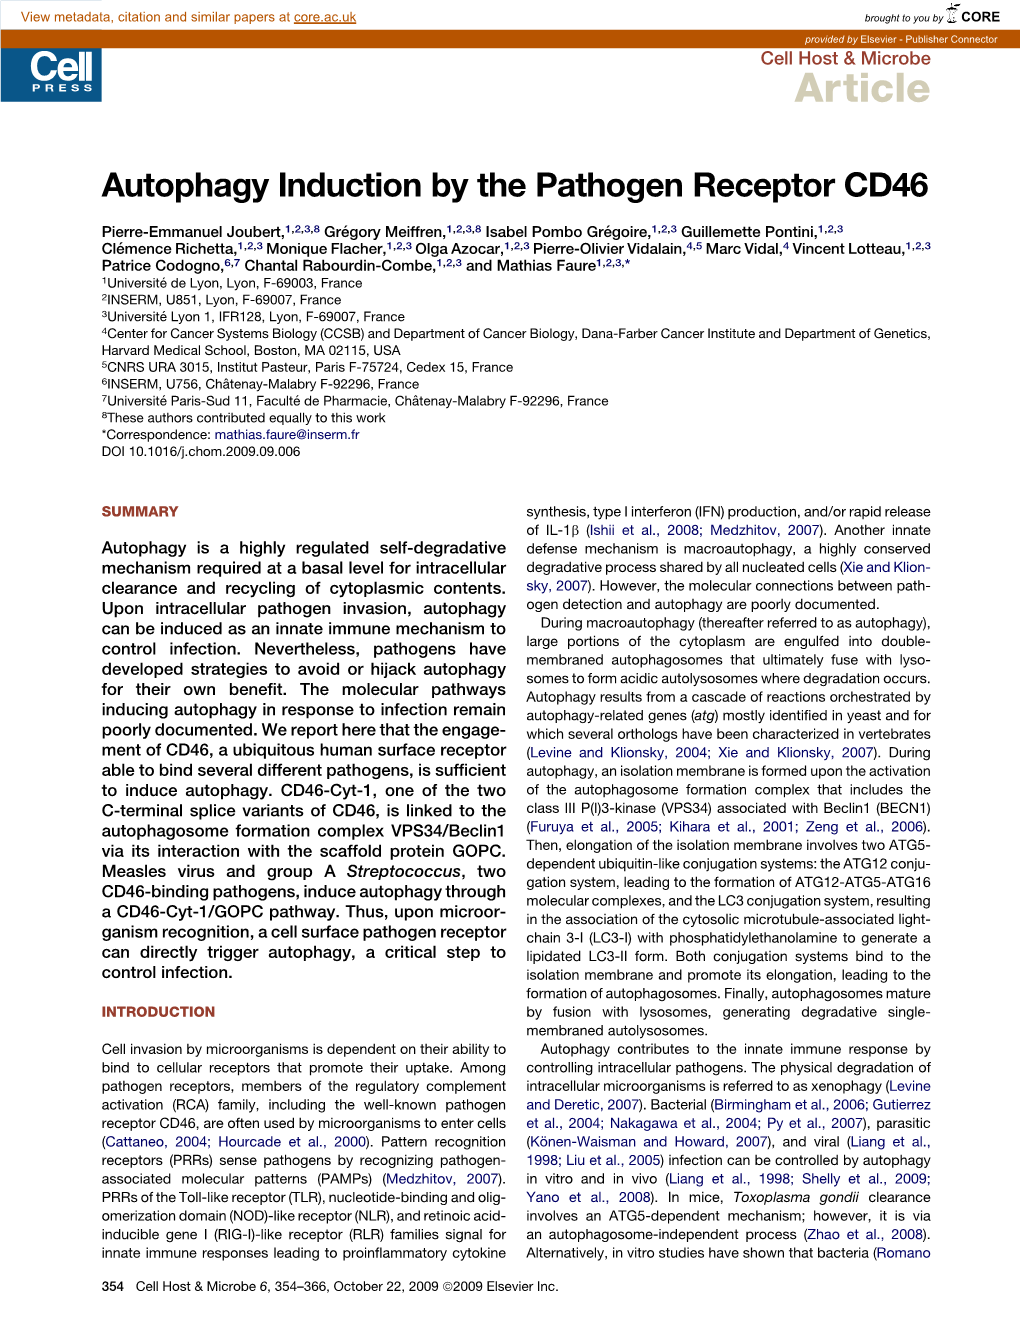 Autophagy Induction by the Pathogen Receptor CD46